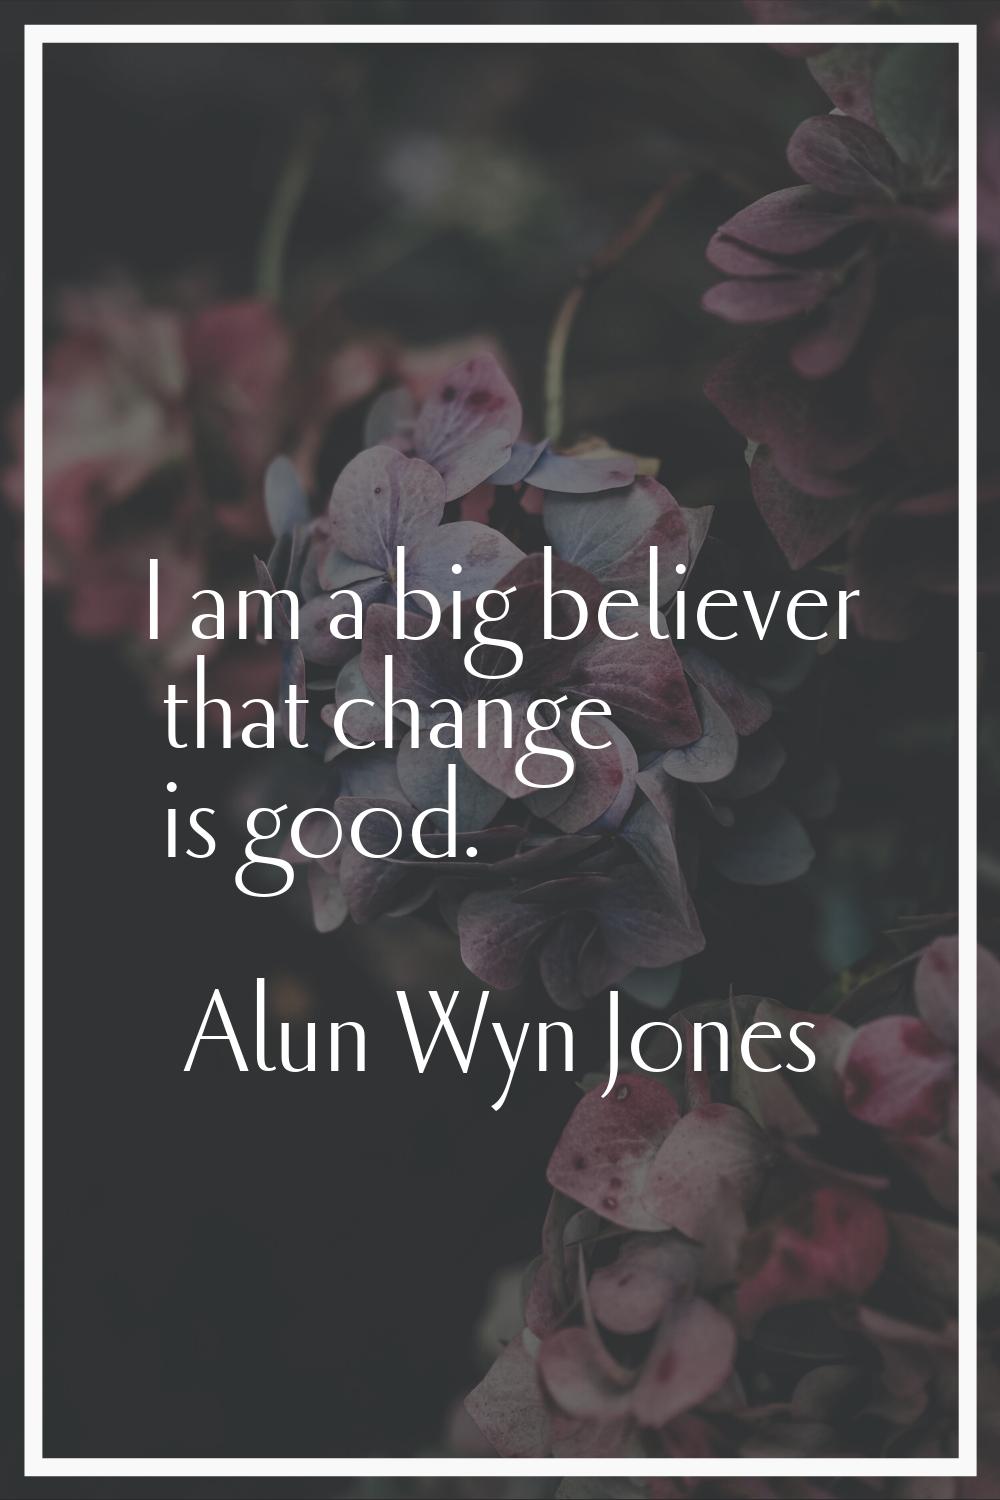 I am a big believer that change is good.